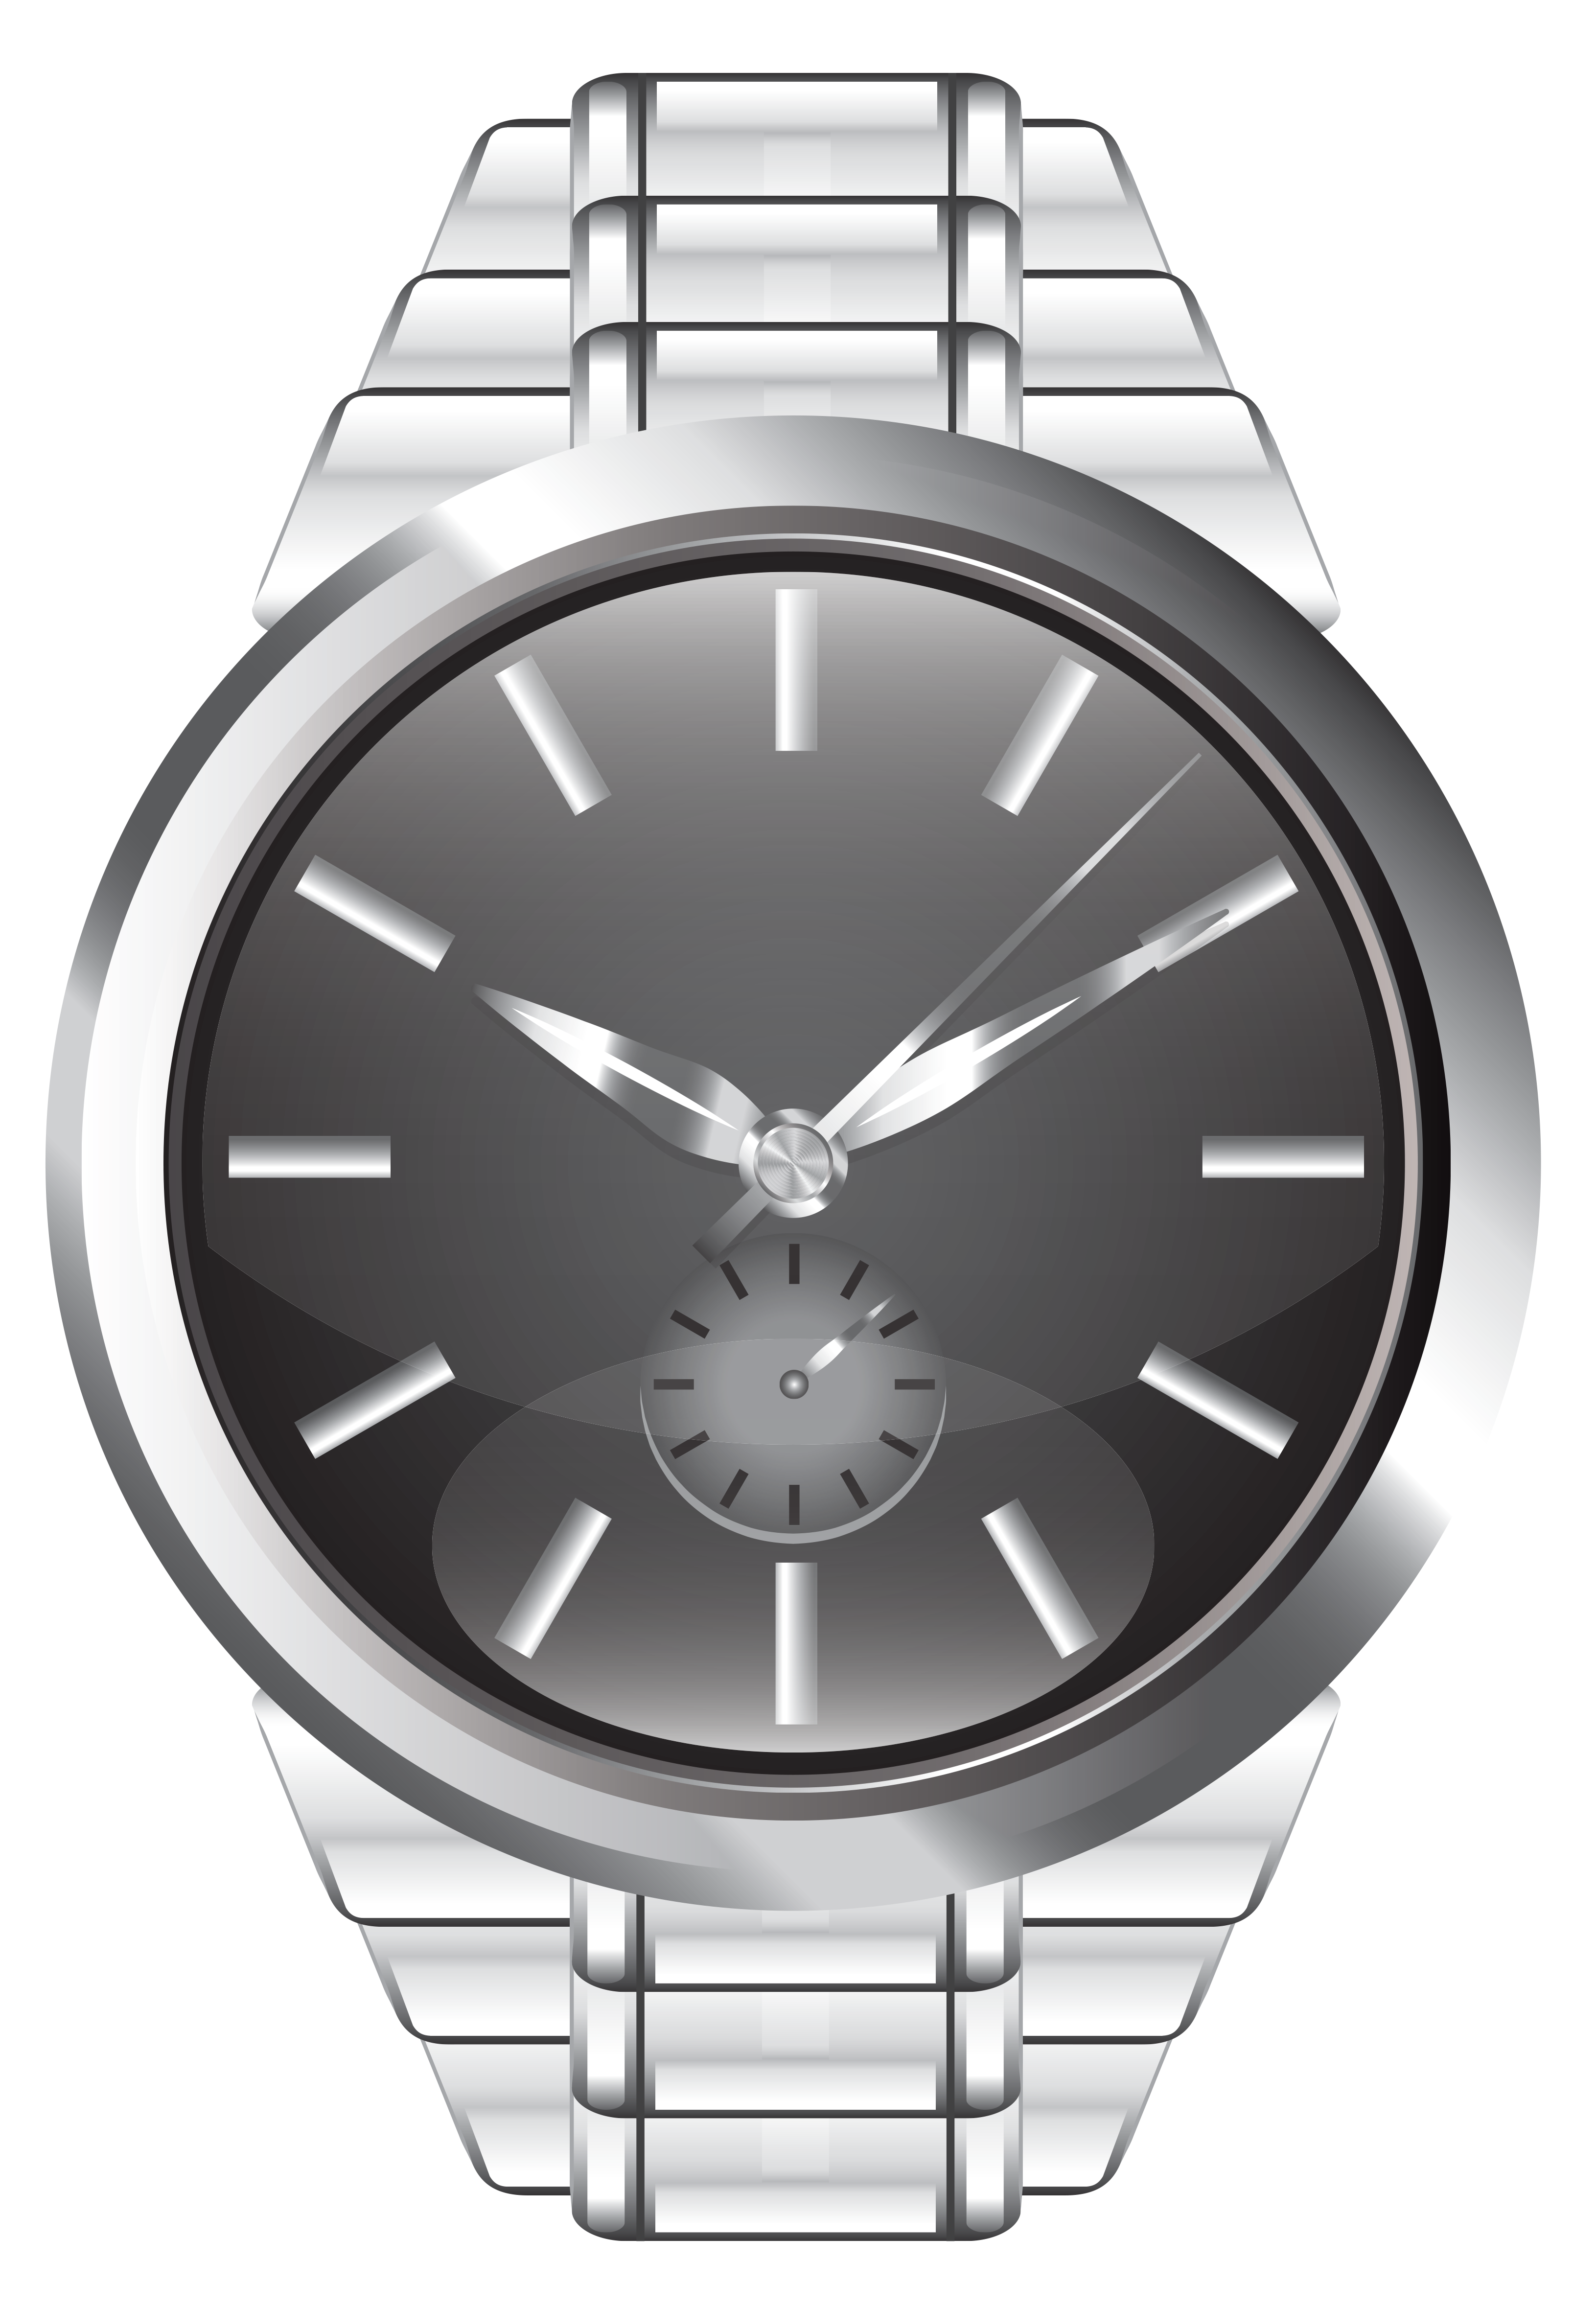 See clipart analog watch. Wrist png clip art